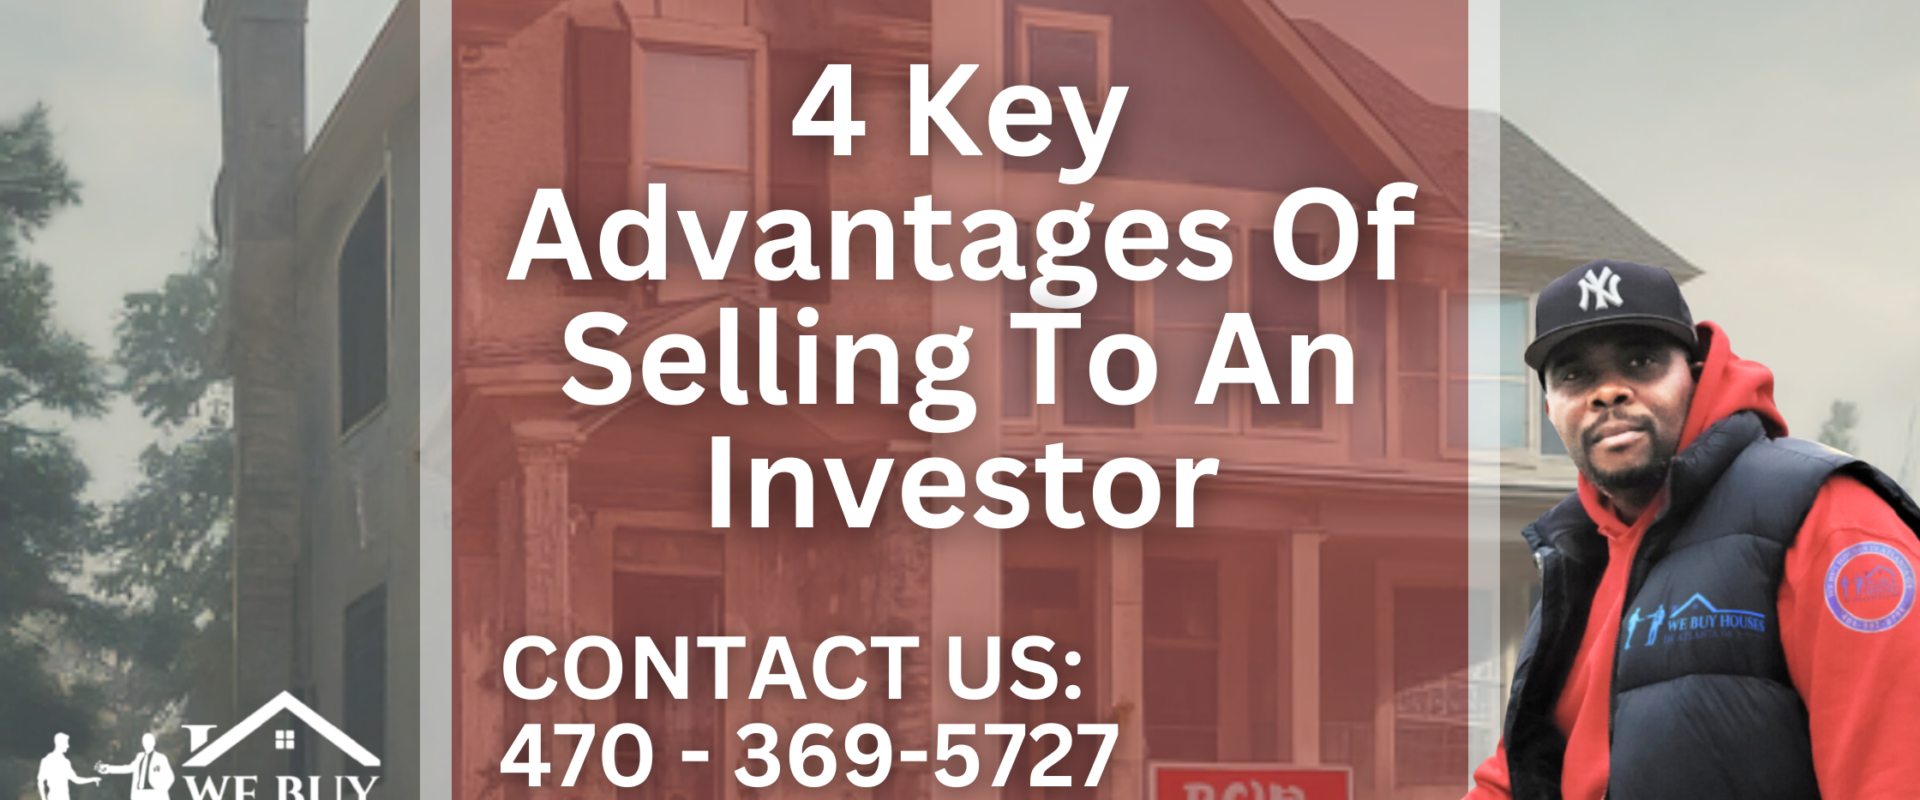 4 Key Advantages Of Selling To An Investor Over A Traditional Buyer